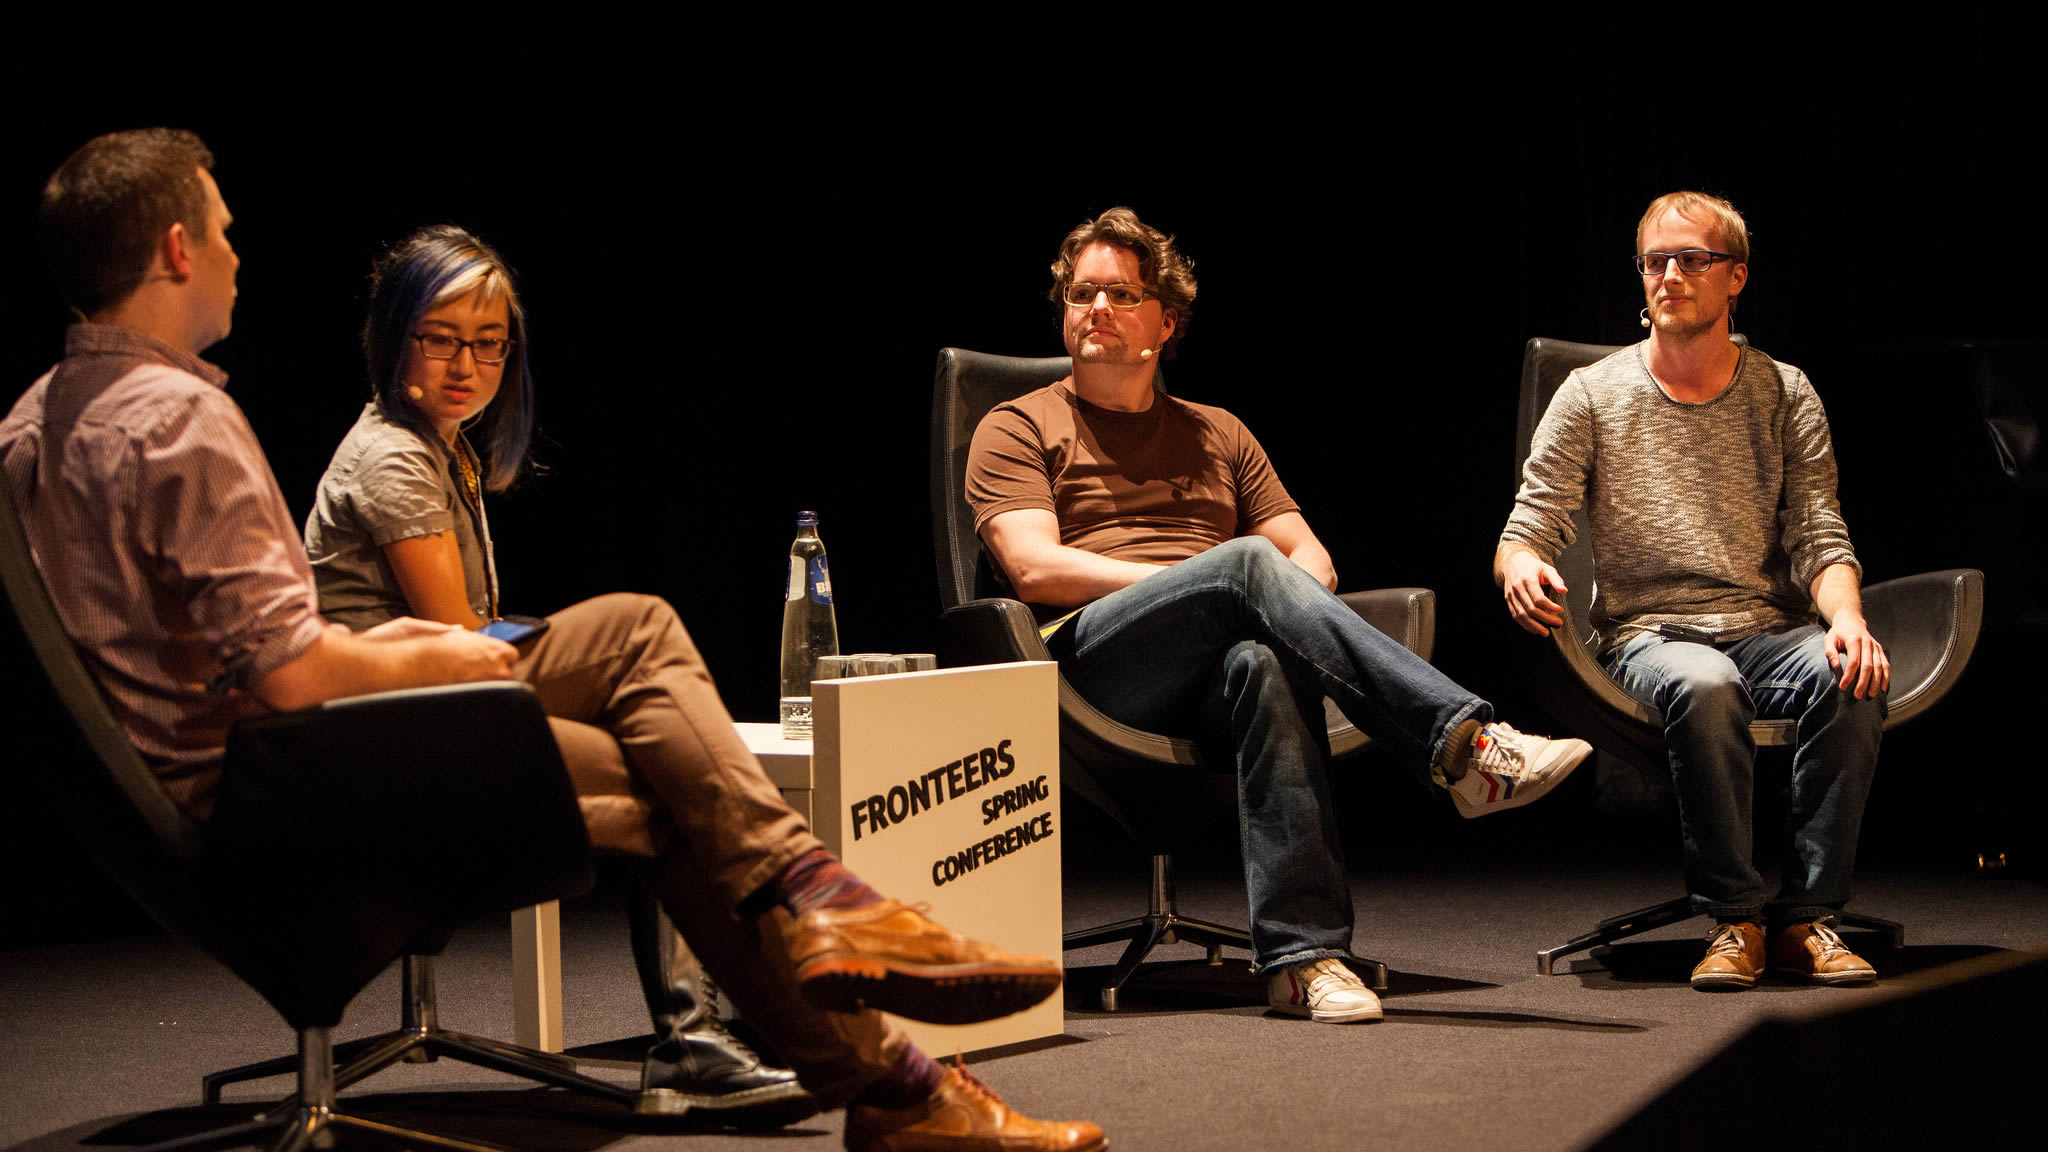 Panel discussion about Technical Performance - Hawksworth, Zhu, Bakaus, Bynens. Photo by Peter Peerdeman